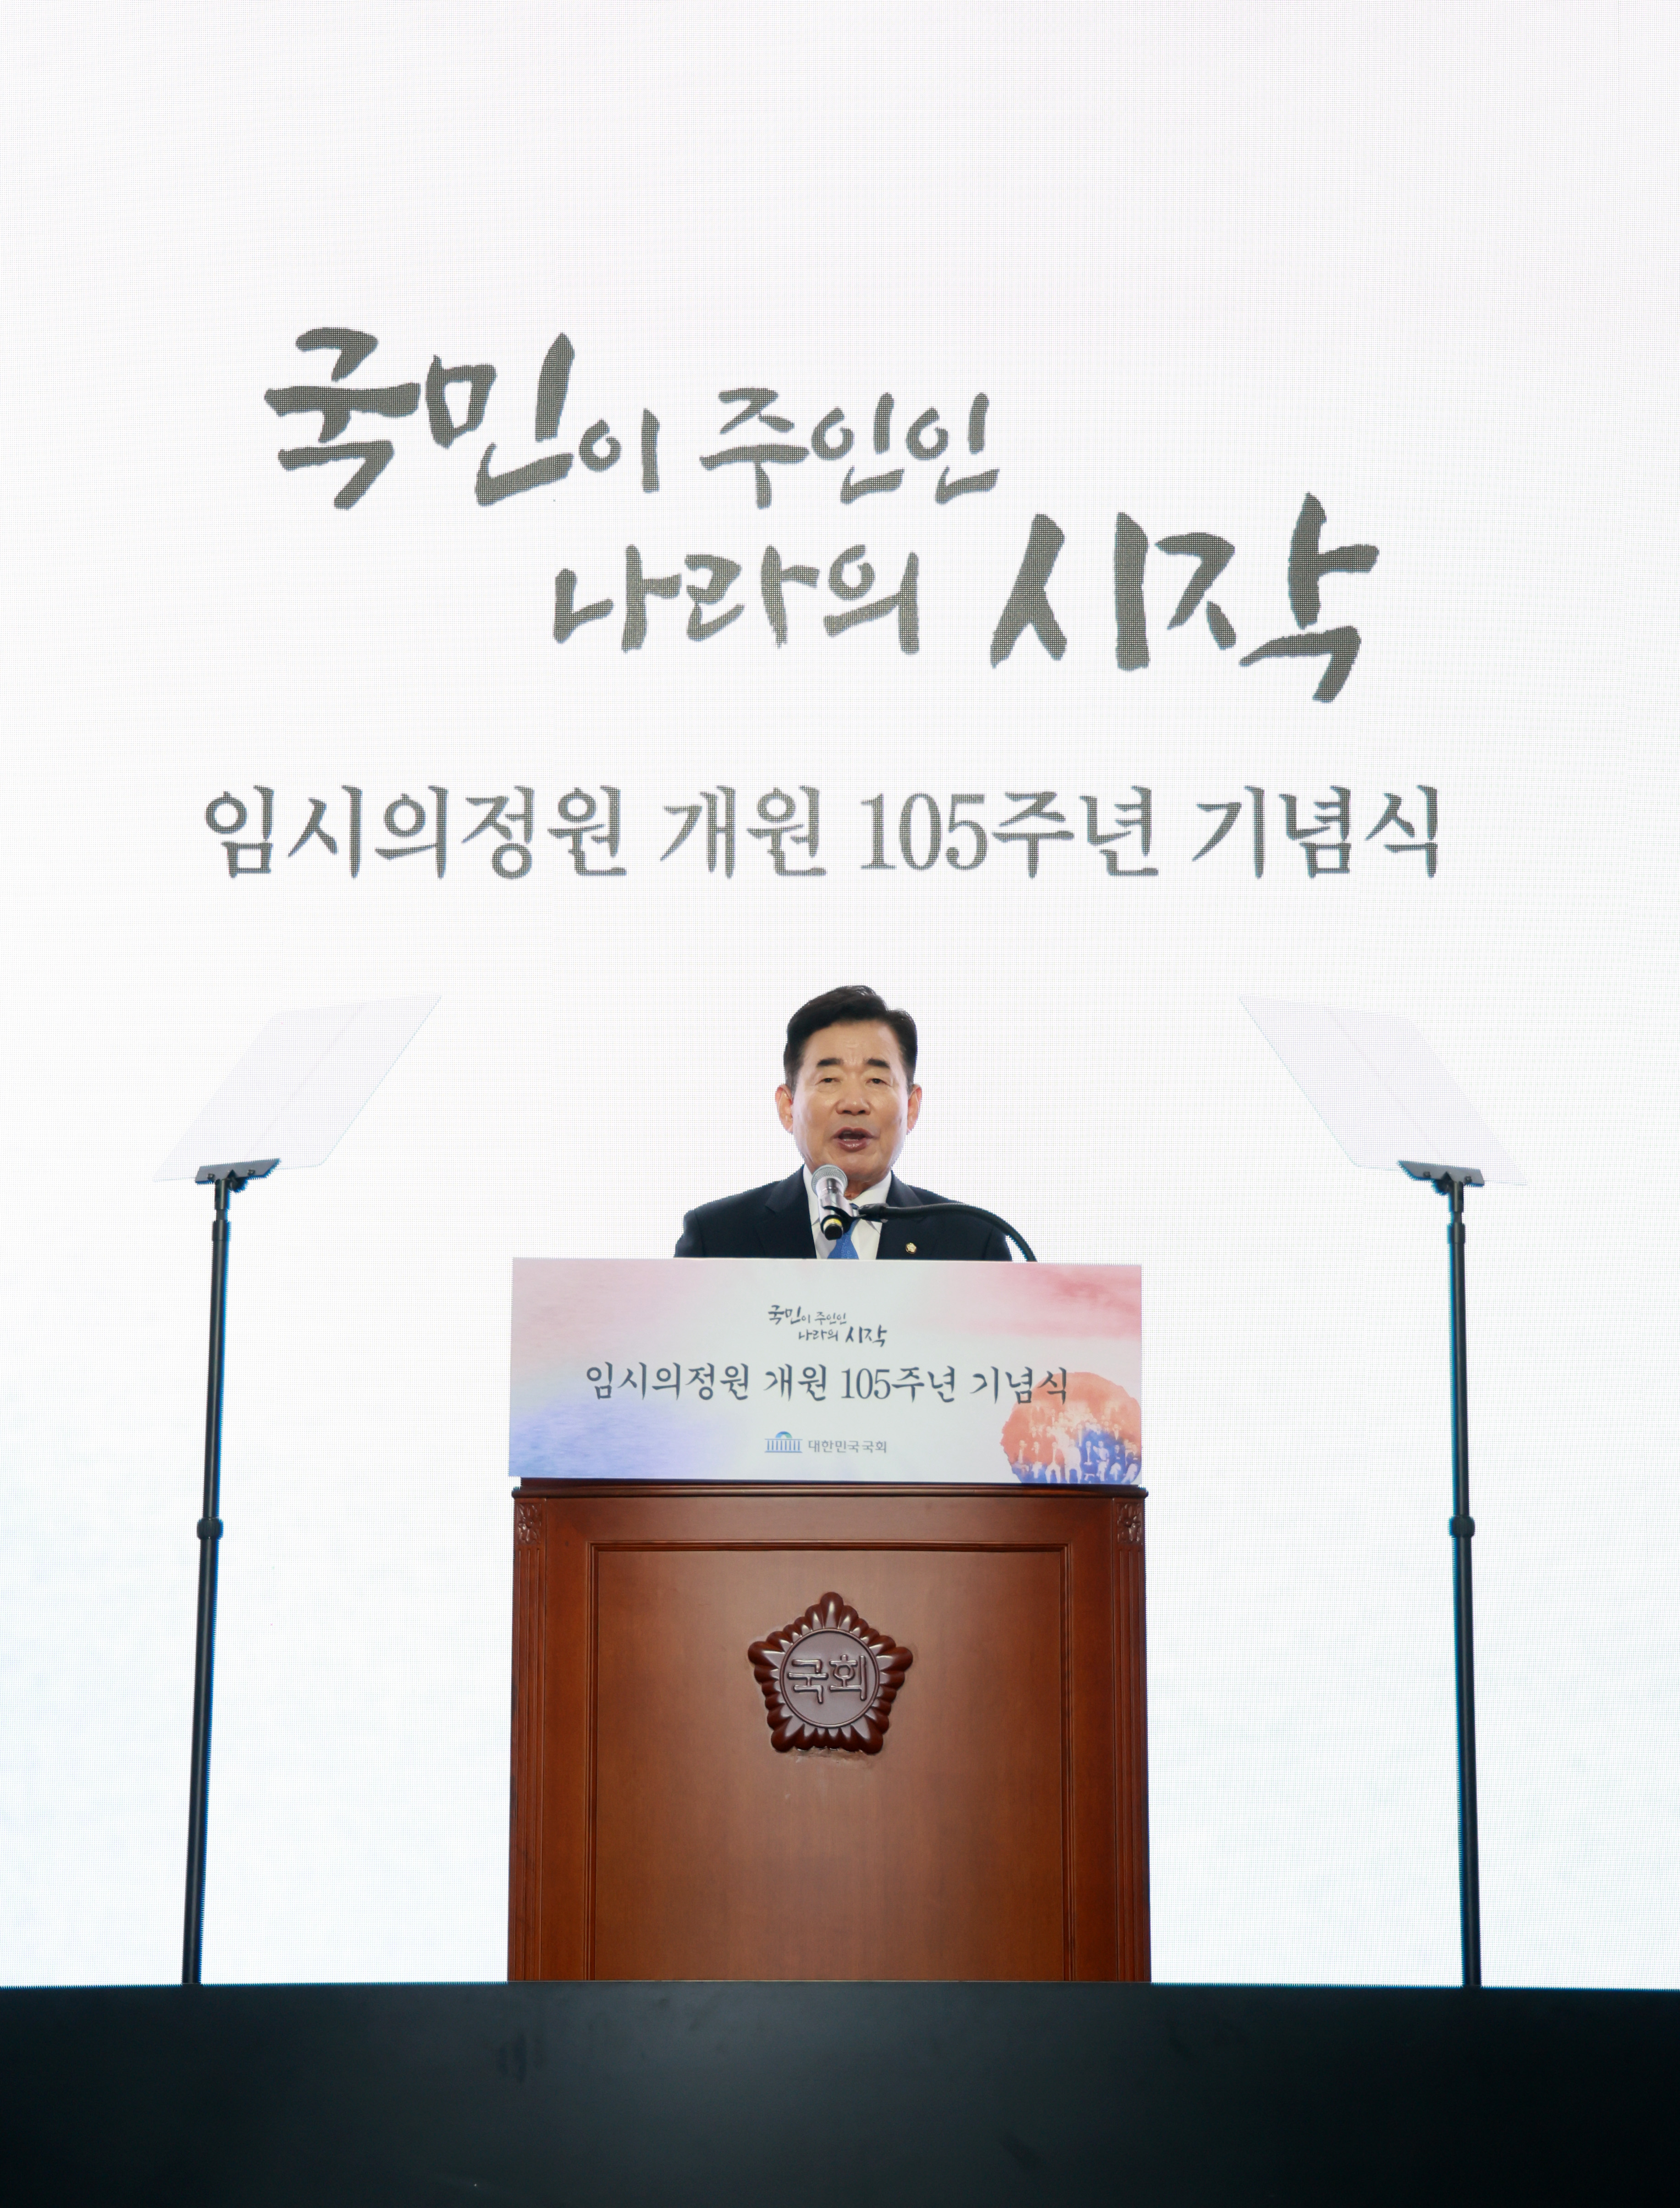 Speaker urges &ldquo;national unity&rdquo; at 105th anniv. of the Provisional Legislative Assembly opening 관련사진 2 보기